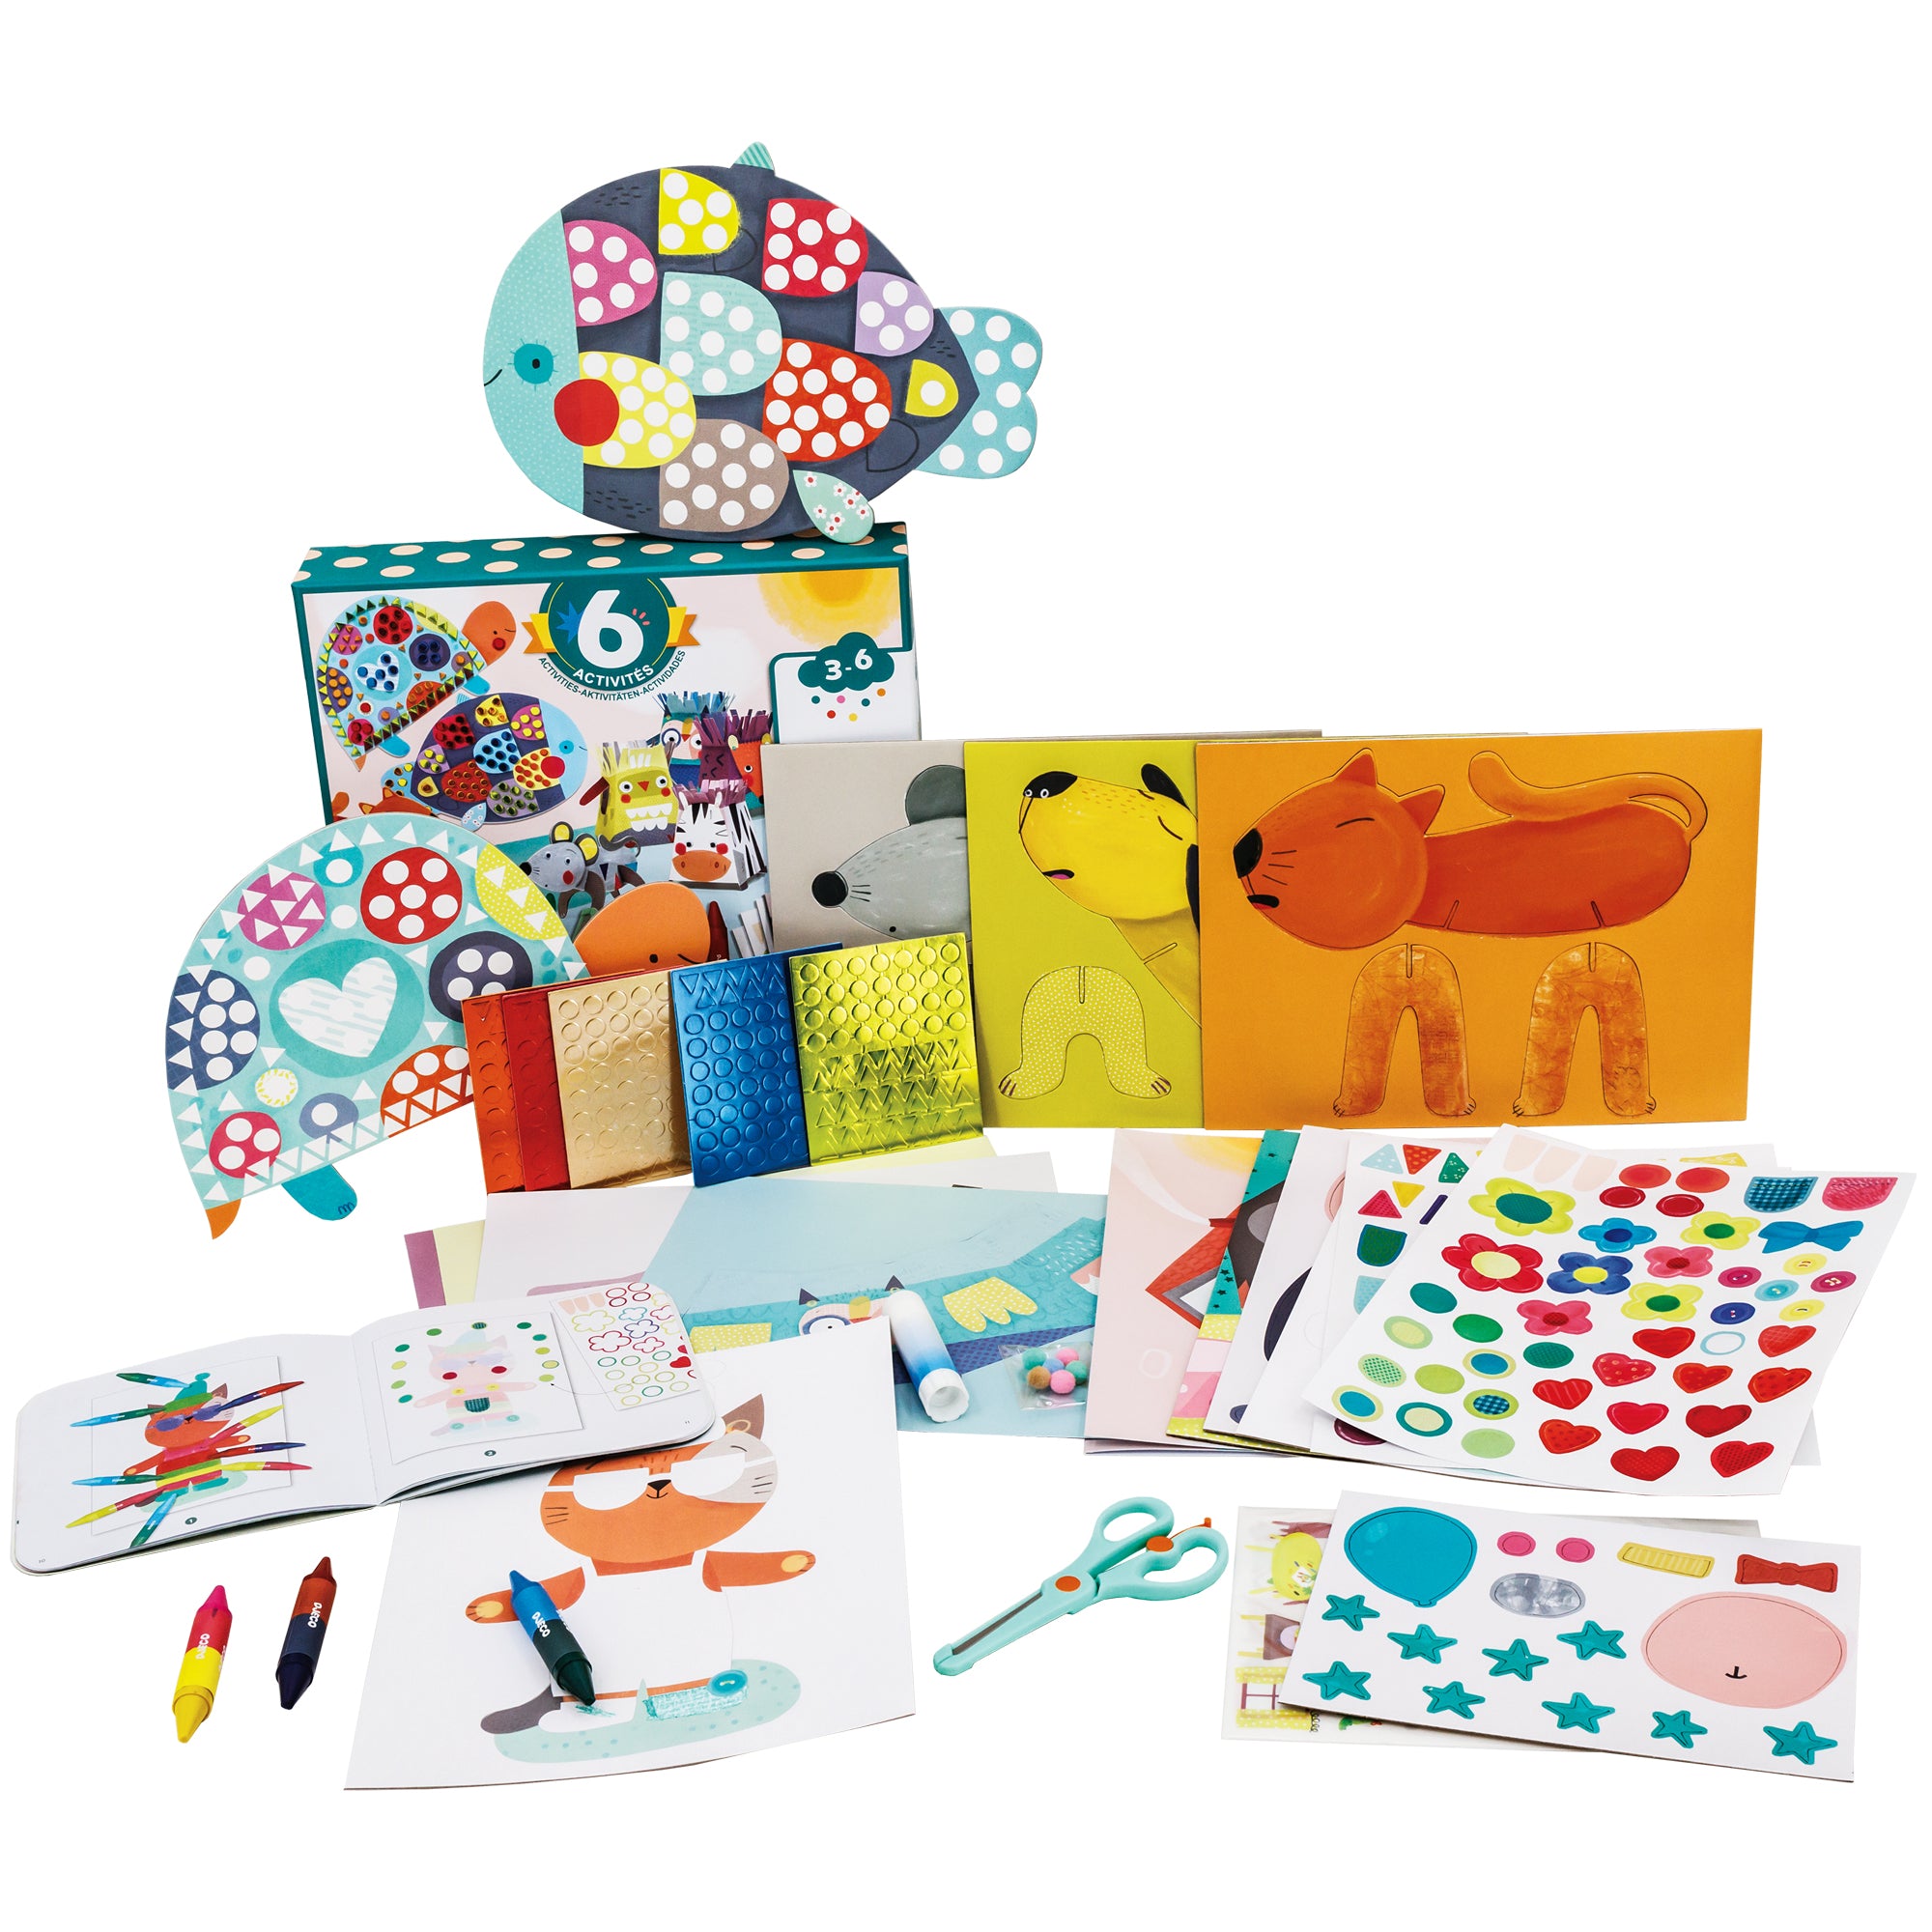 The Djeco Animals and Their Homes, Multi-Activity Box with contents all spread out. On top of the box in the back is a large fish and a turtle laid up against the box. On the box and off to the right are foil dot sticker sheets and 3 D animal sheets. Laid out on the surface in front are the instruction book, crayons, sticker sheets, scissors, and project sheets.